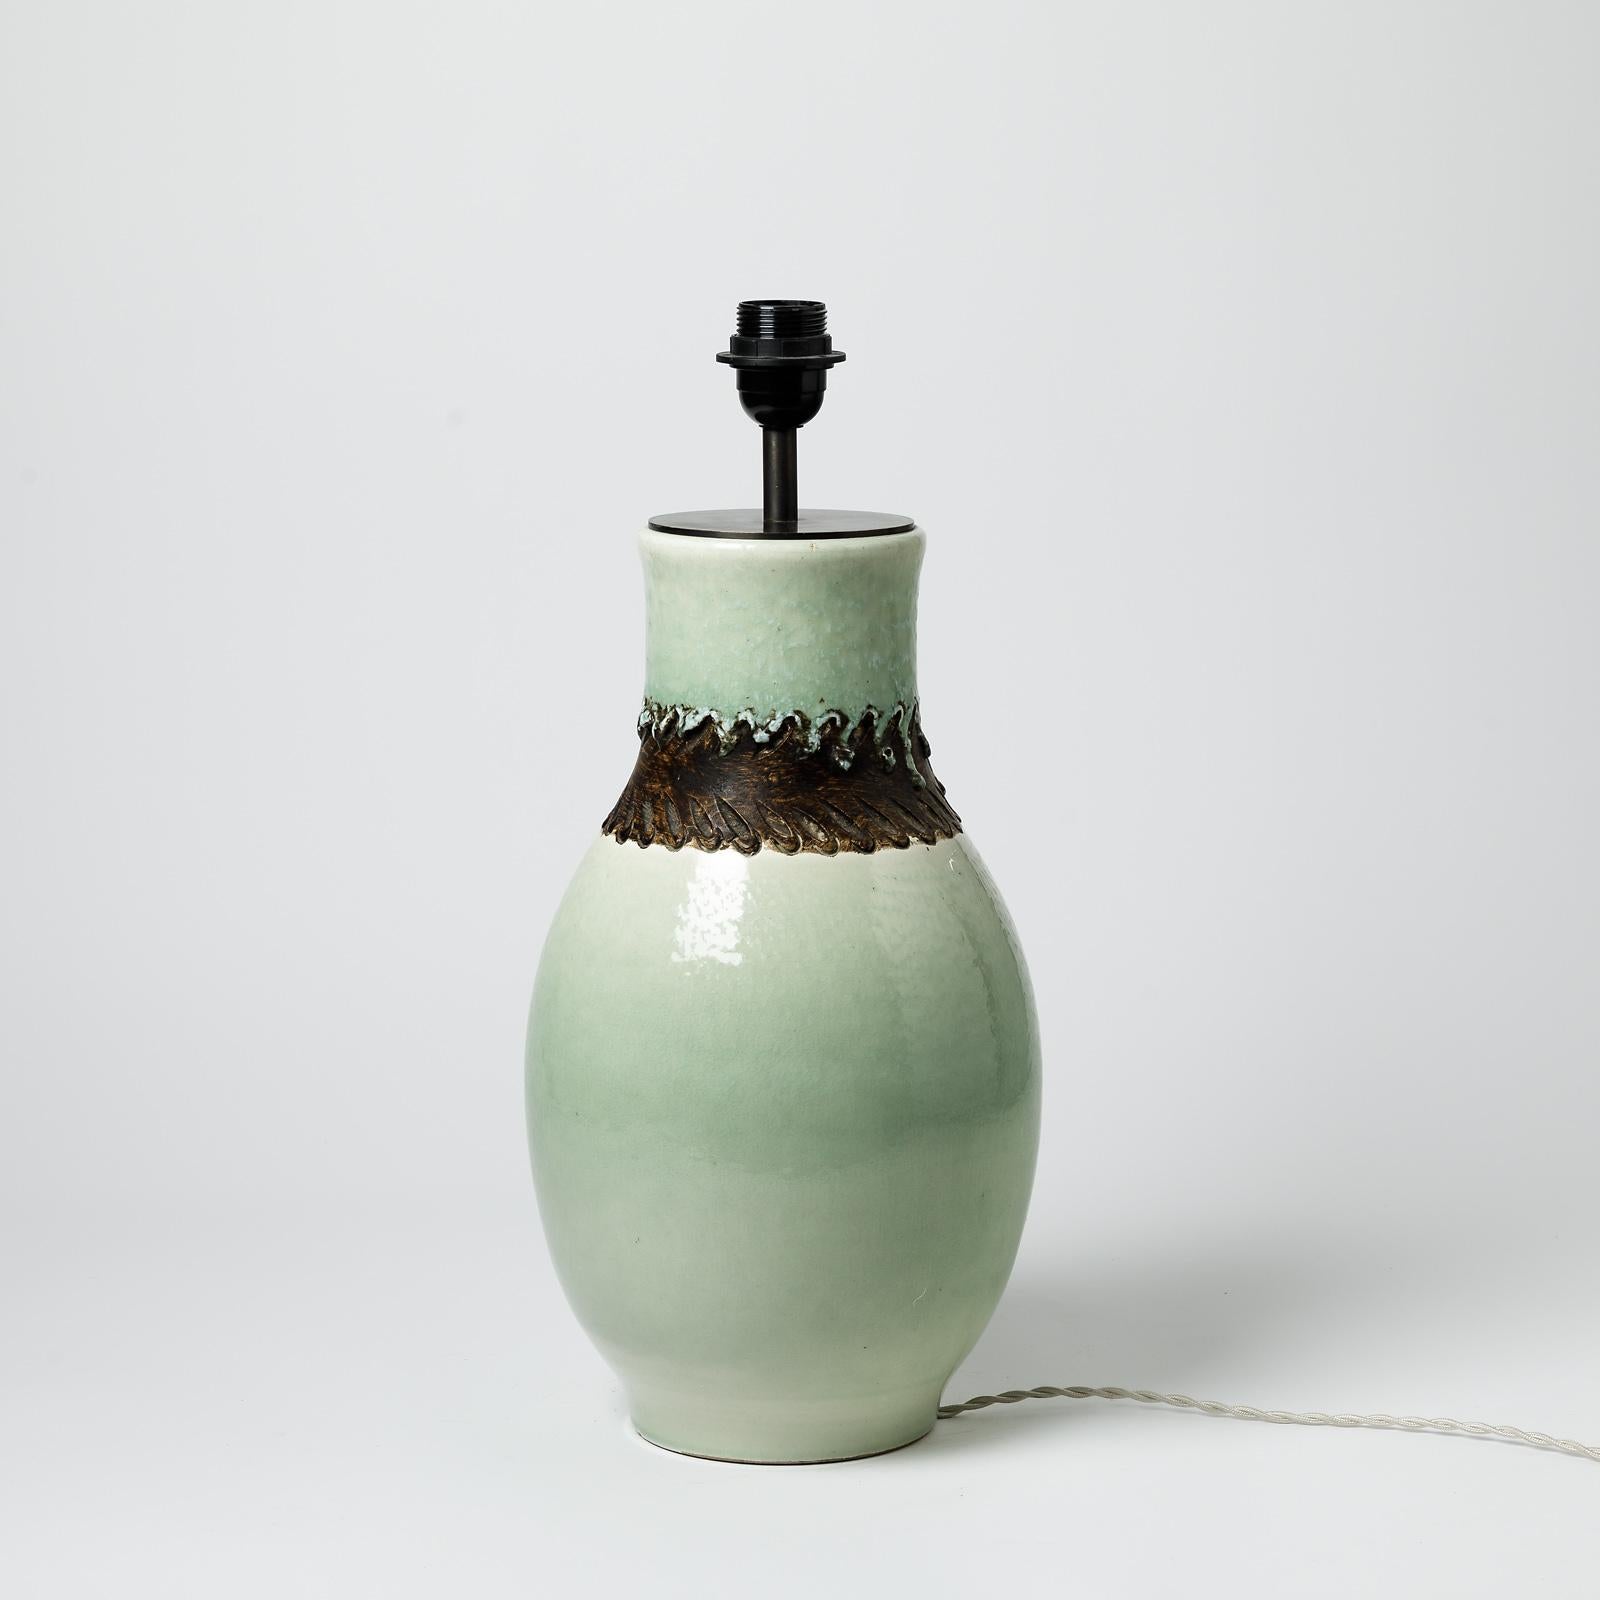 French Important green glazed ceramic table lamp by Pol Chambost, circa 1930-1940